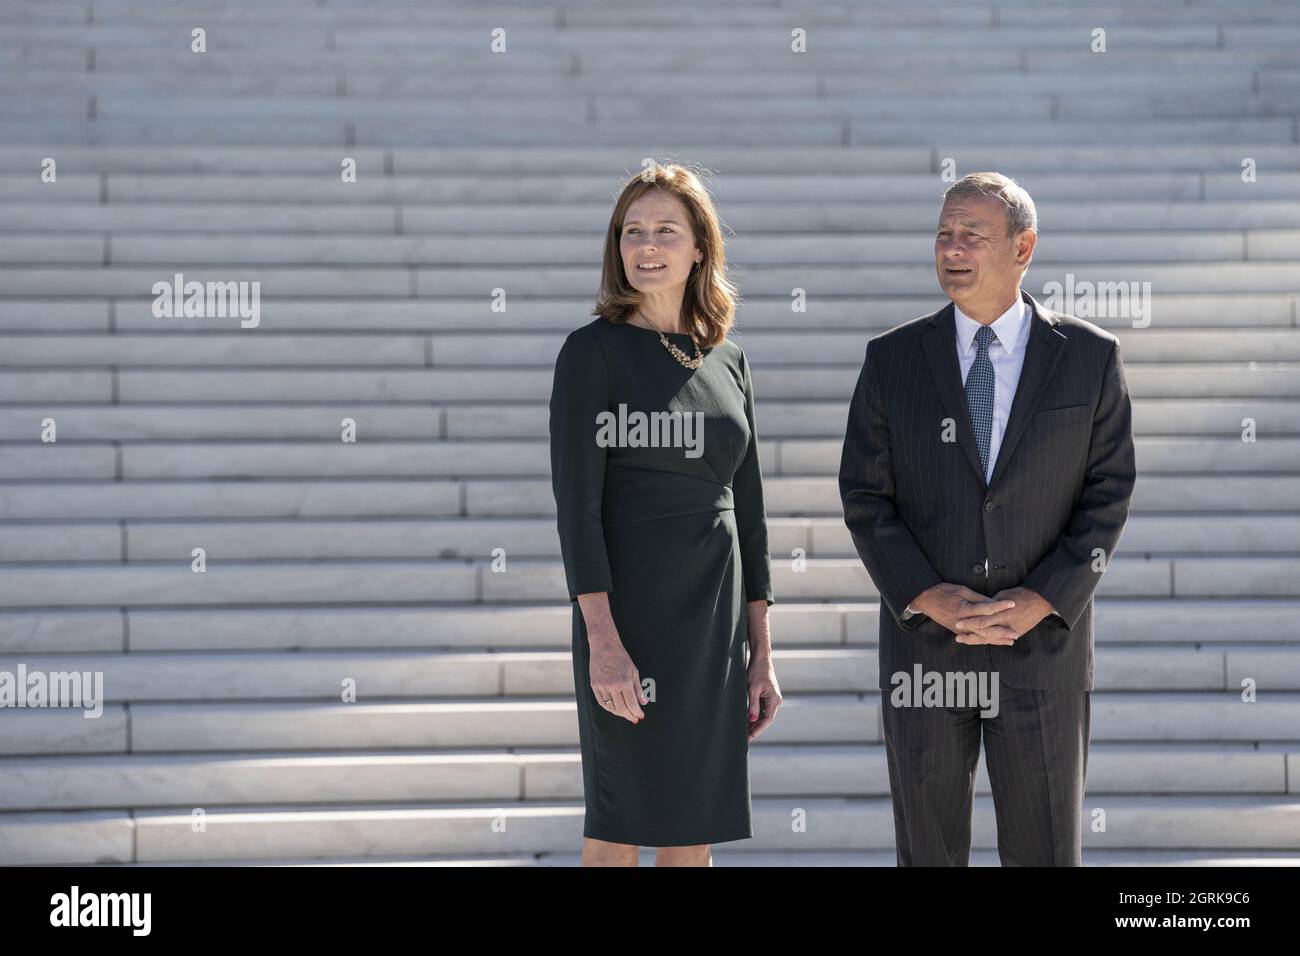 Washington, United States. 01st Oct, 2021. Supreme Court Justice Amy Coney Barrett and Chief Justice of the Supreme Court John Roberts participate in a photo-op outside of the Supreme Court of the United States following a investiture ceremony in Washington, DC on Friday October 1, 2021. Photo by Sarah Silbiger/UPI Credit: UPI/Alamy Live News Stock Photo